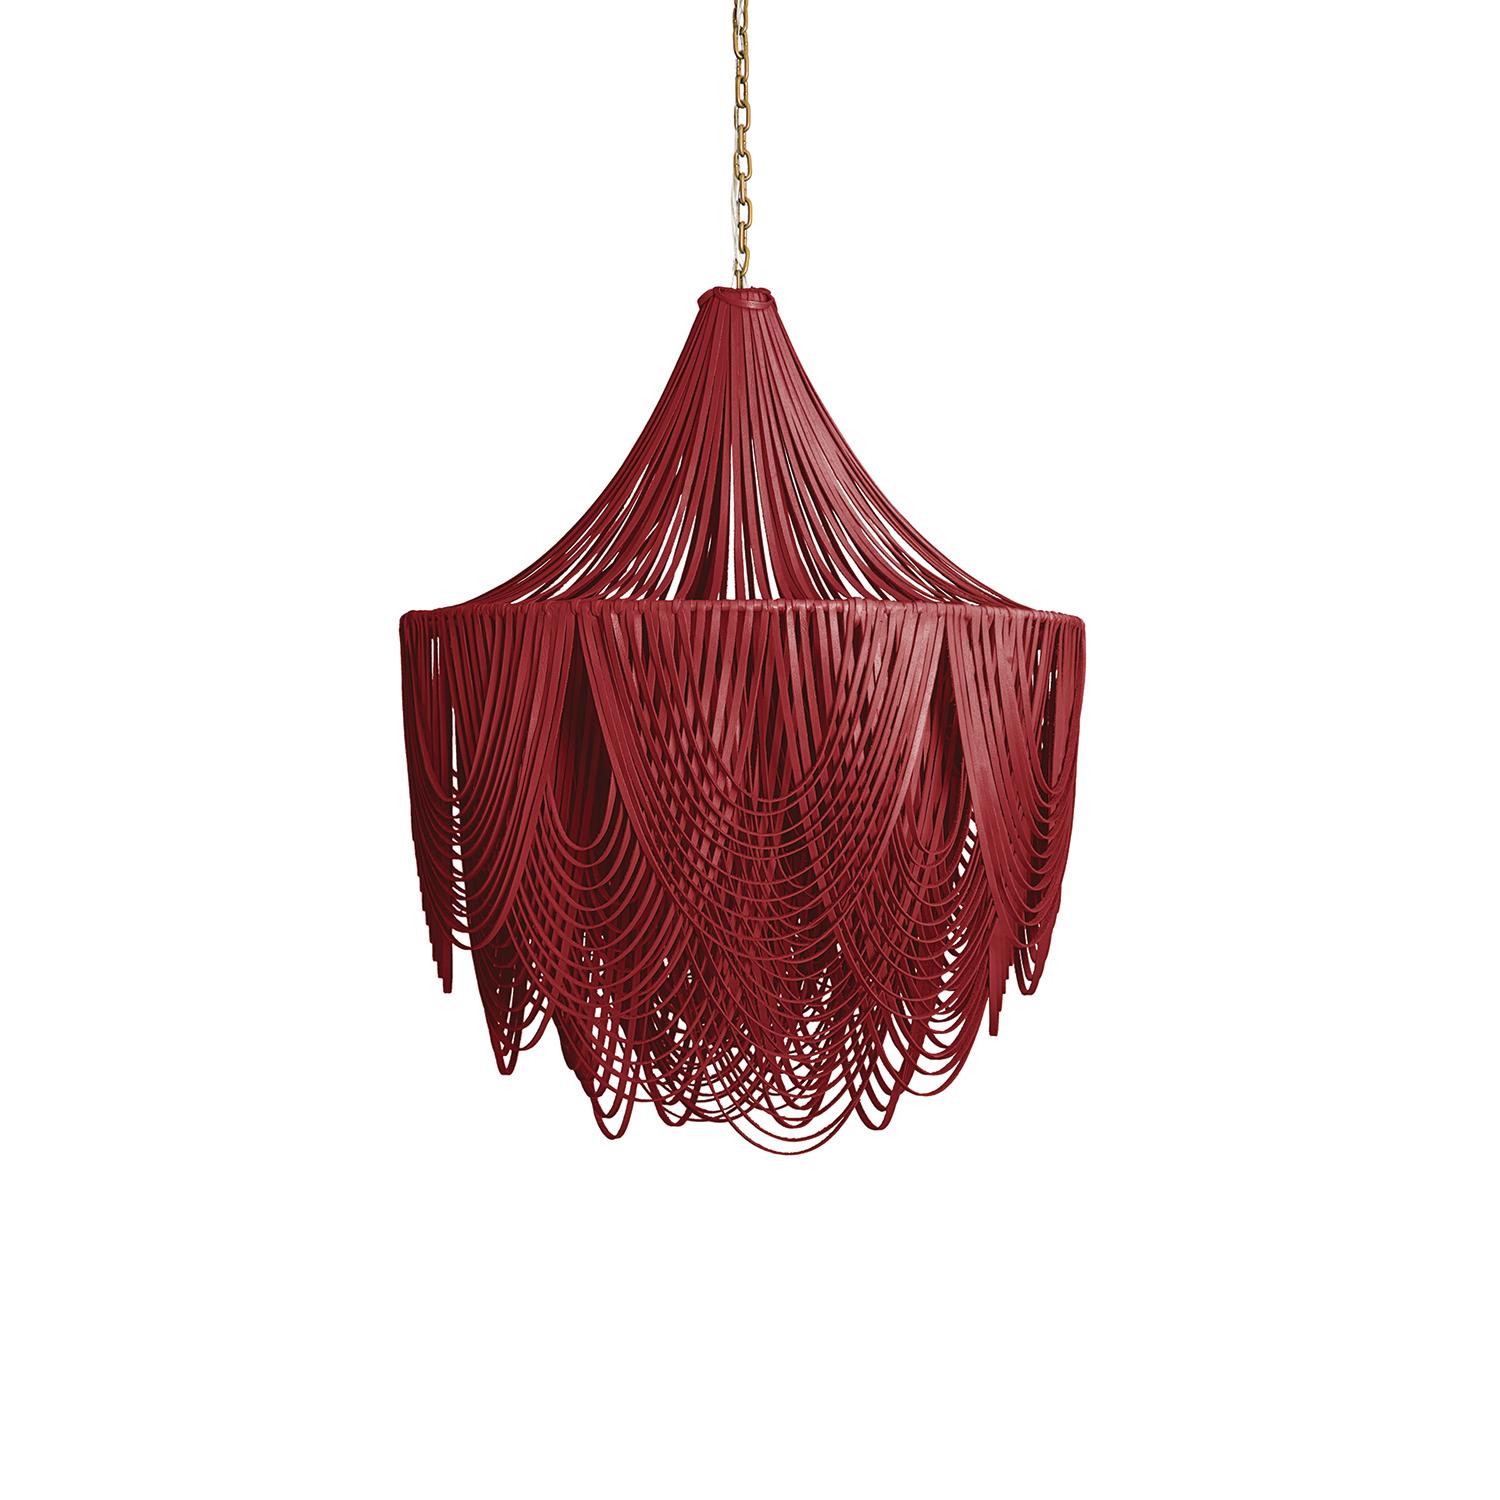 Medium Round Whisper with Crown Leather Chandelier in NeKeia Leather